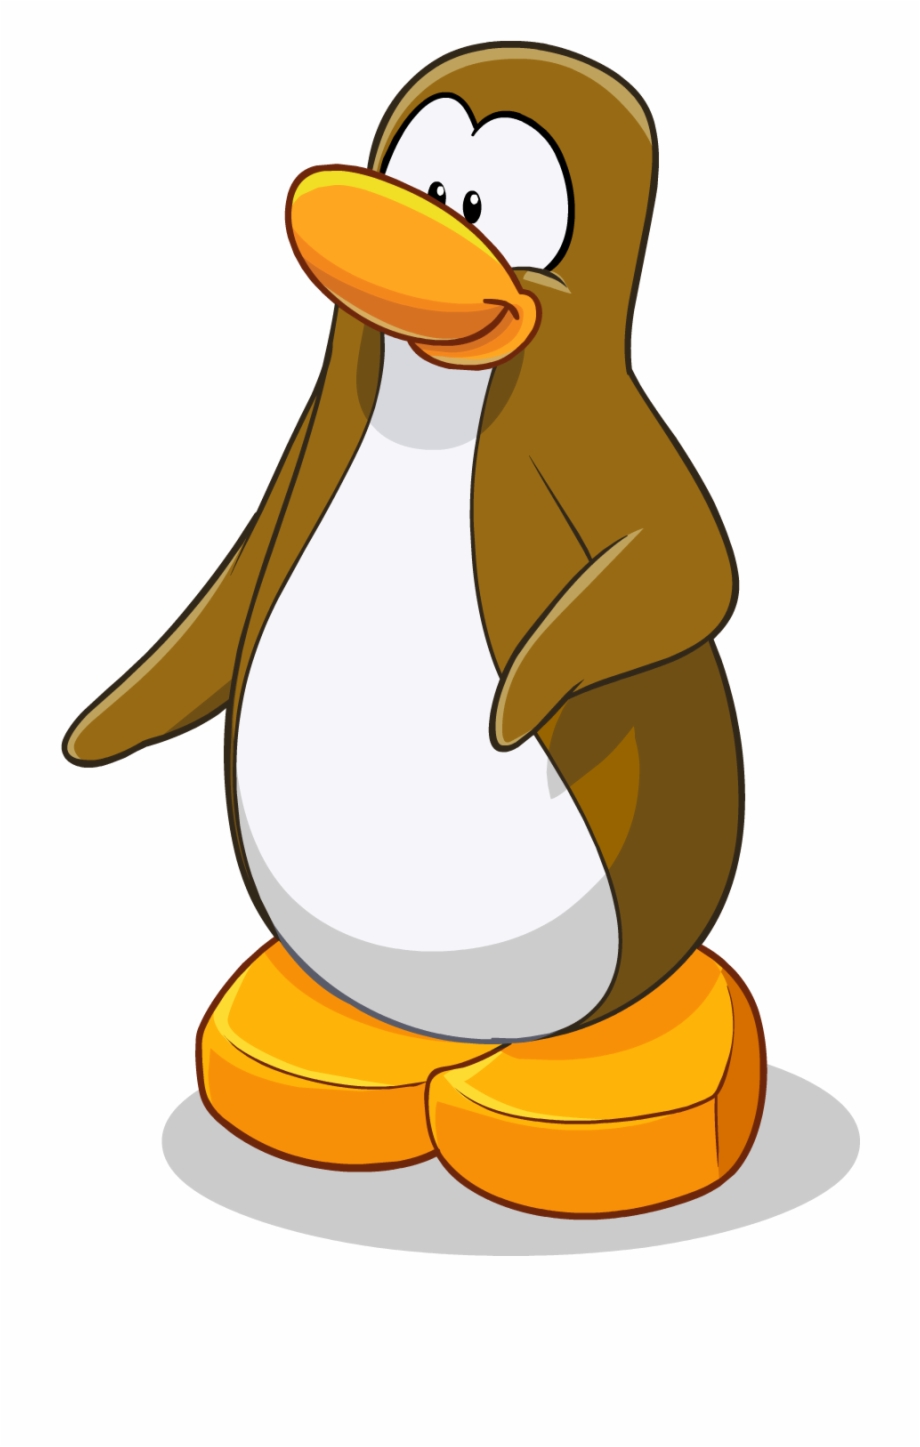 Play Club Penguin PNG Transparent Images Free Download, Vector Files